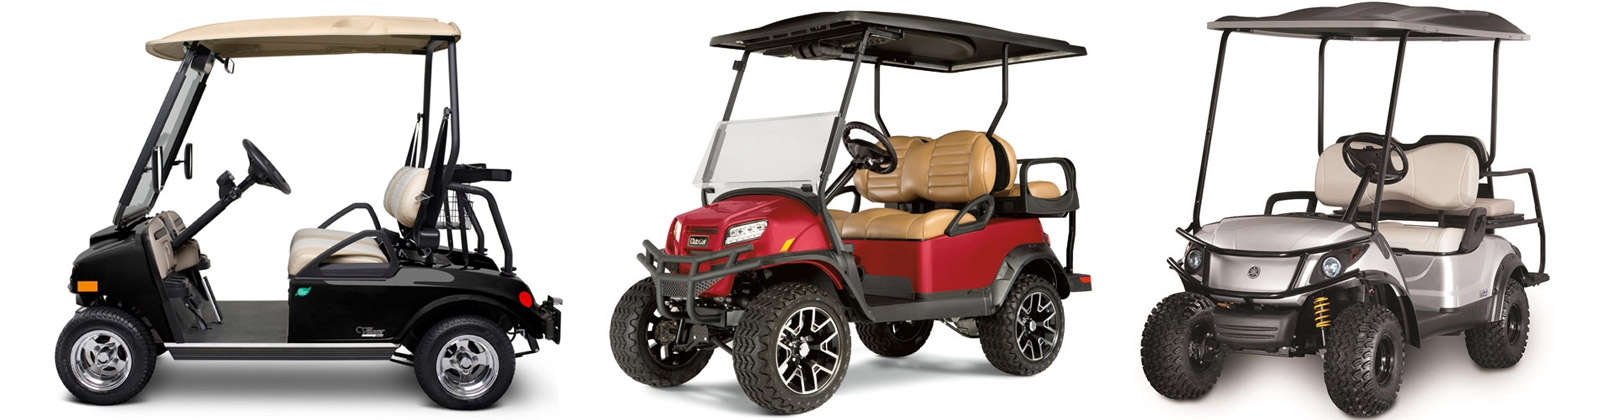 DoubleTake® Club Car DS Body Sets – Spartan  Brad's Golf Cars, Inc. - The  Golf Cart Leader in the Triad of NC, Greensboro, Winston-Salem, High Point,  Charlotte, and Lake Norman.